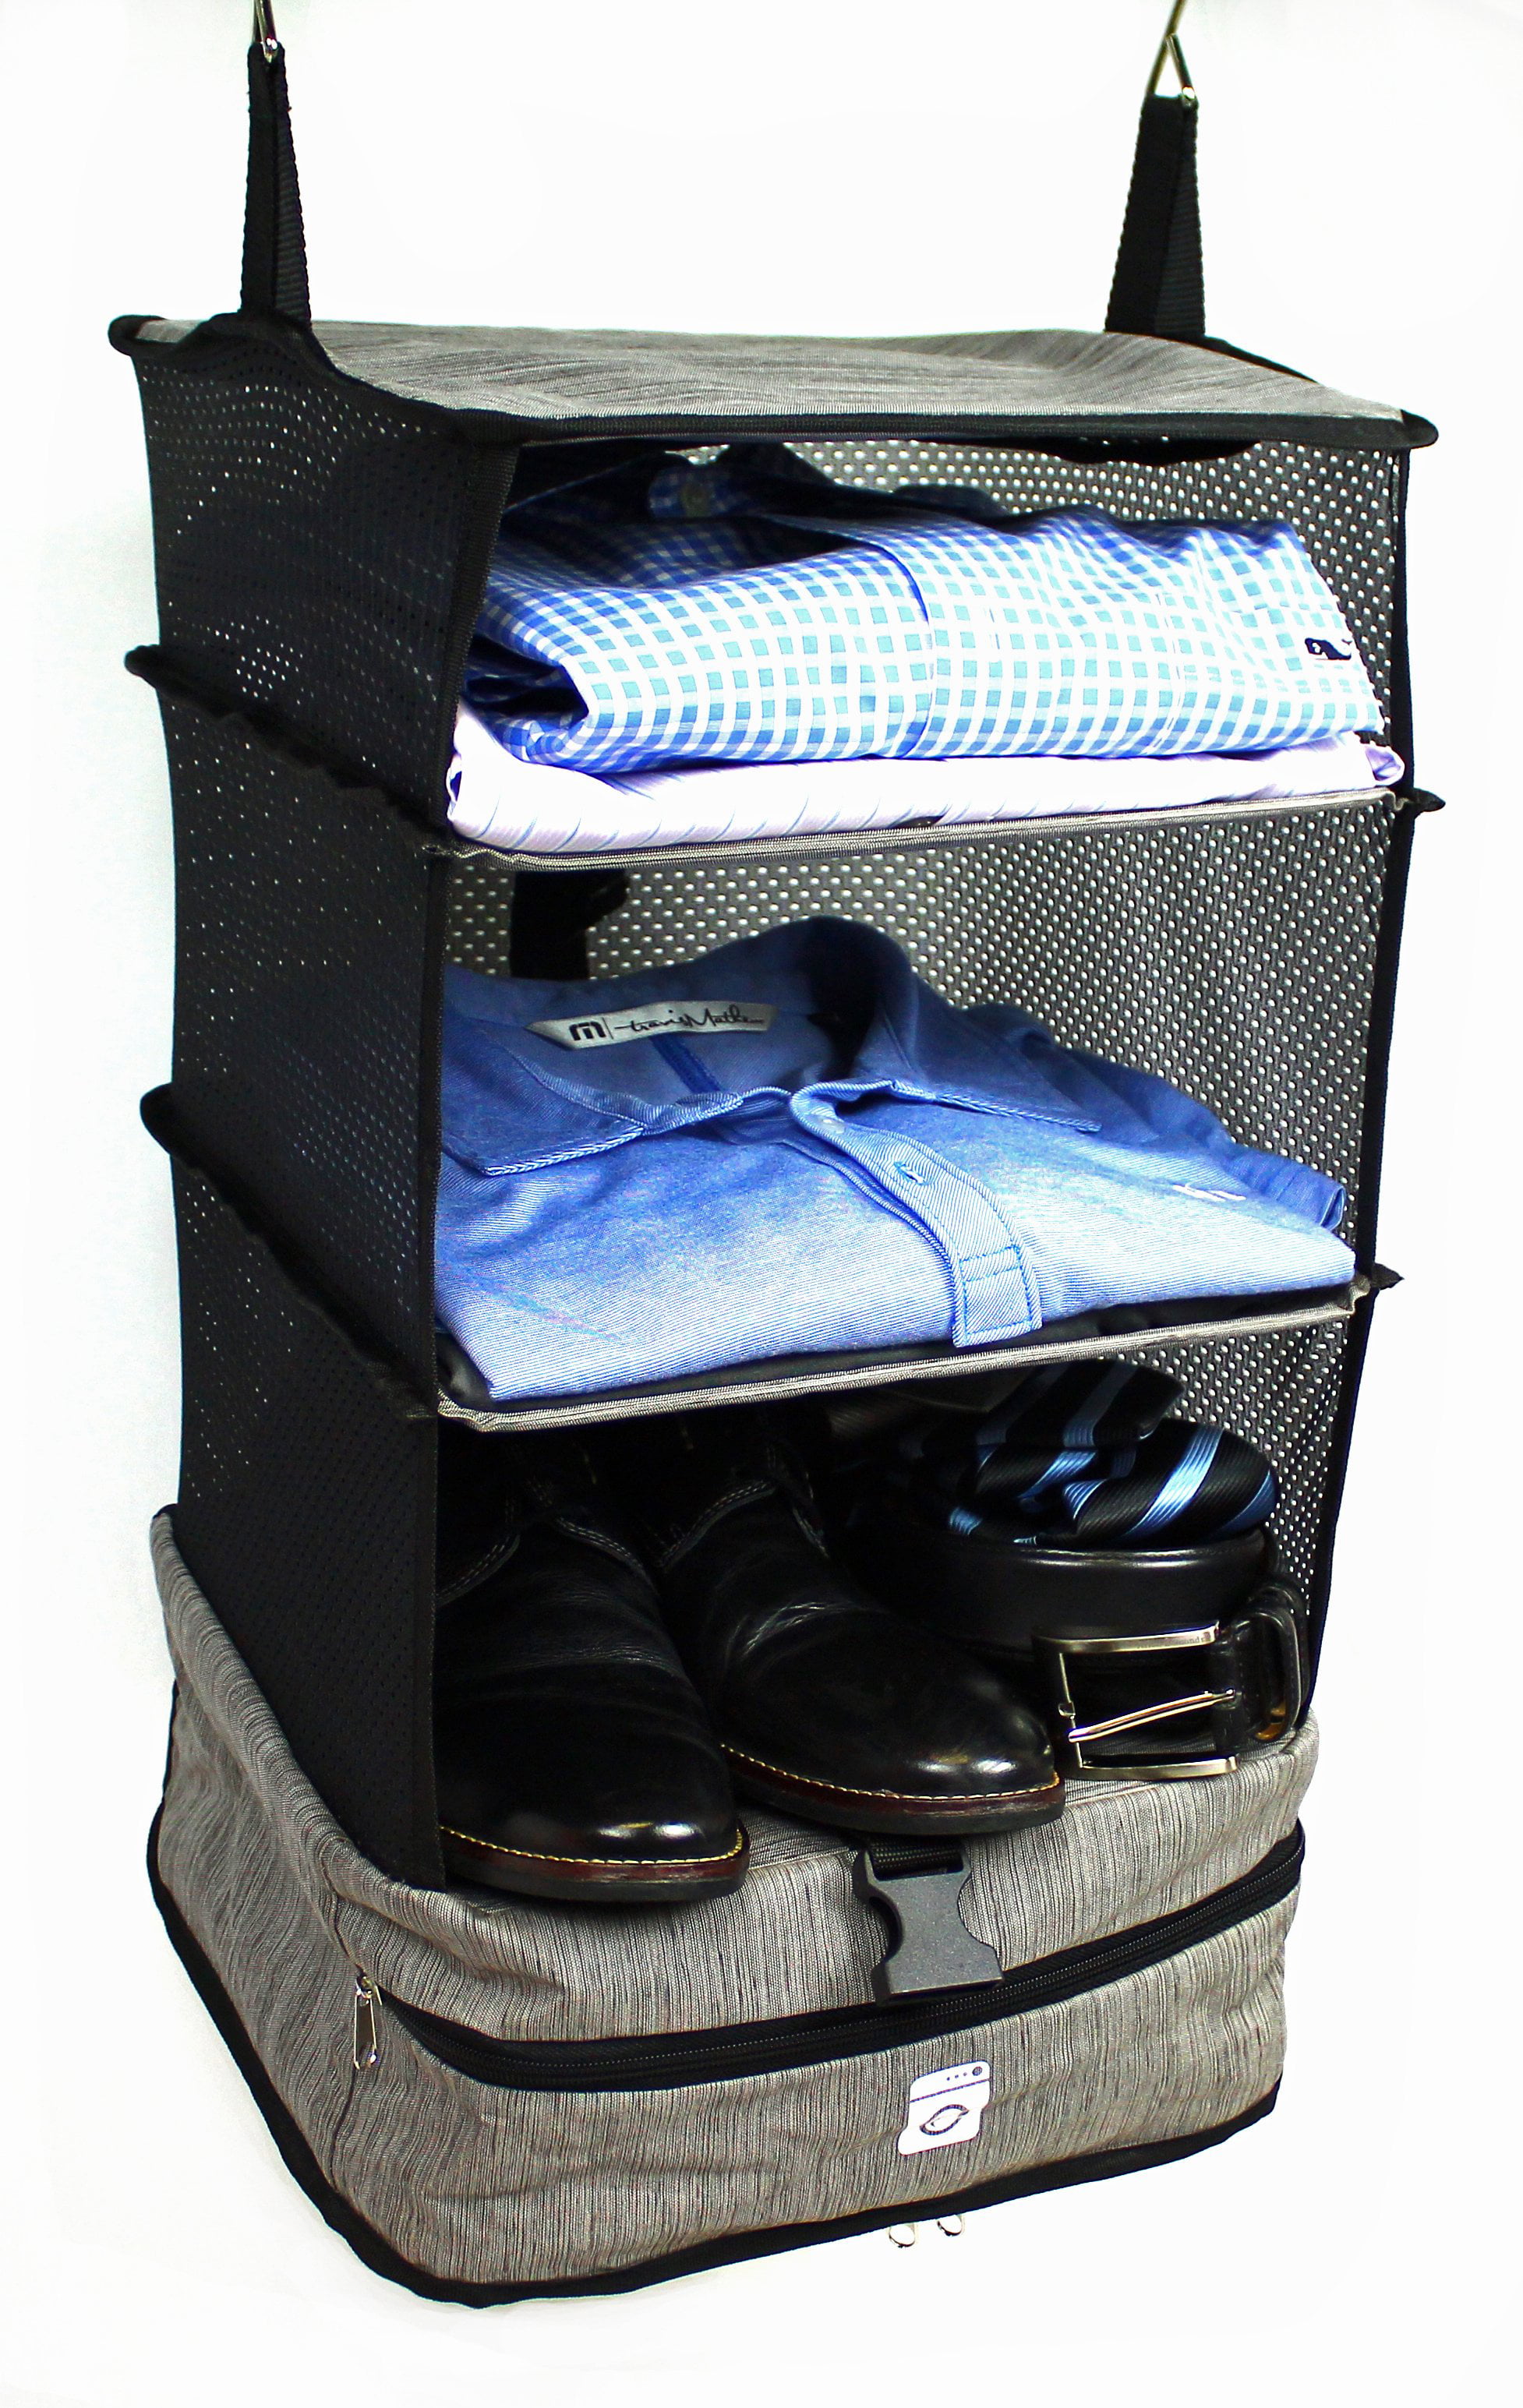 Stow-N-Go Portable Luggage System Suitcase Organizer Large BLUE Packable Hanging Travel Shelves & Packing Cube Organizer 